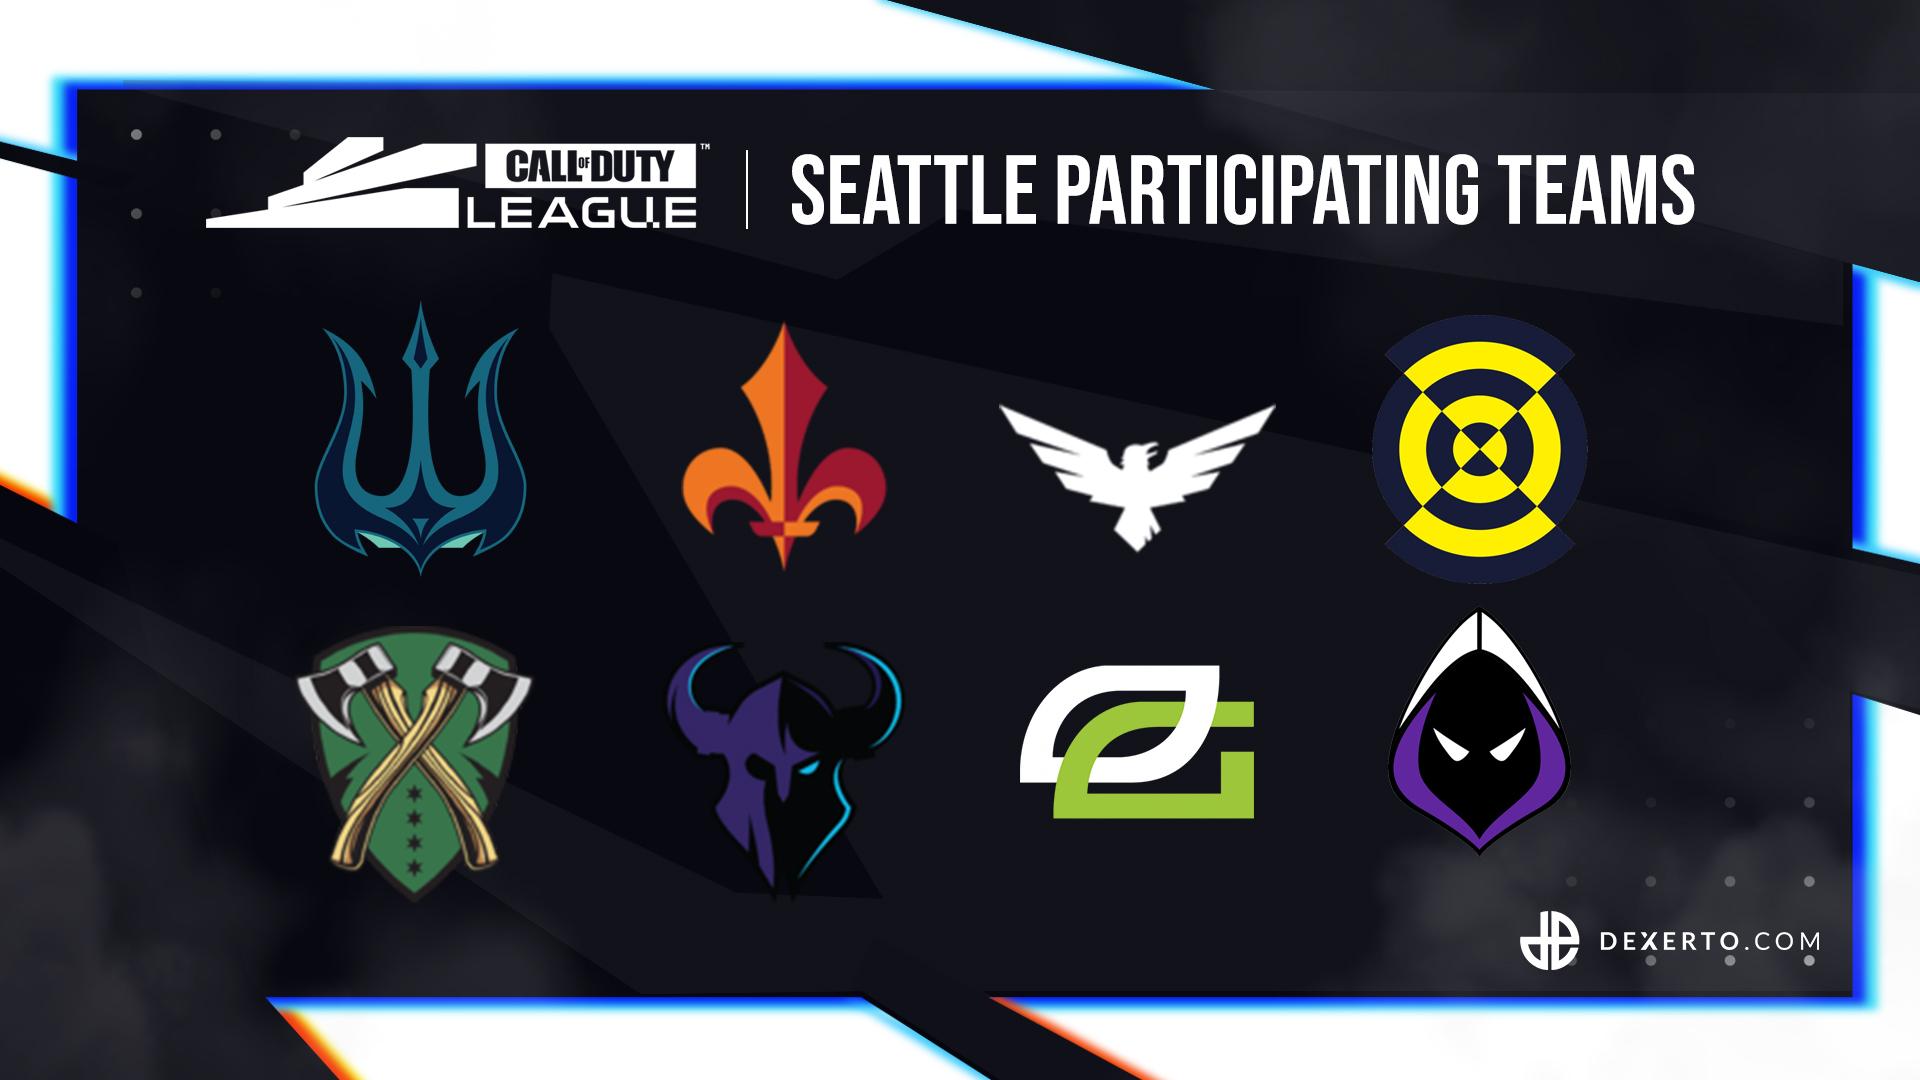 CDL Seattle participating teams.